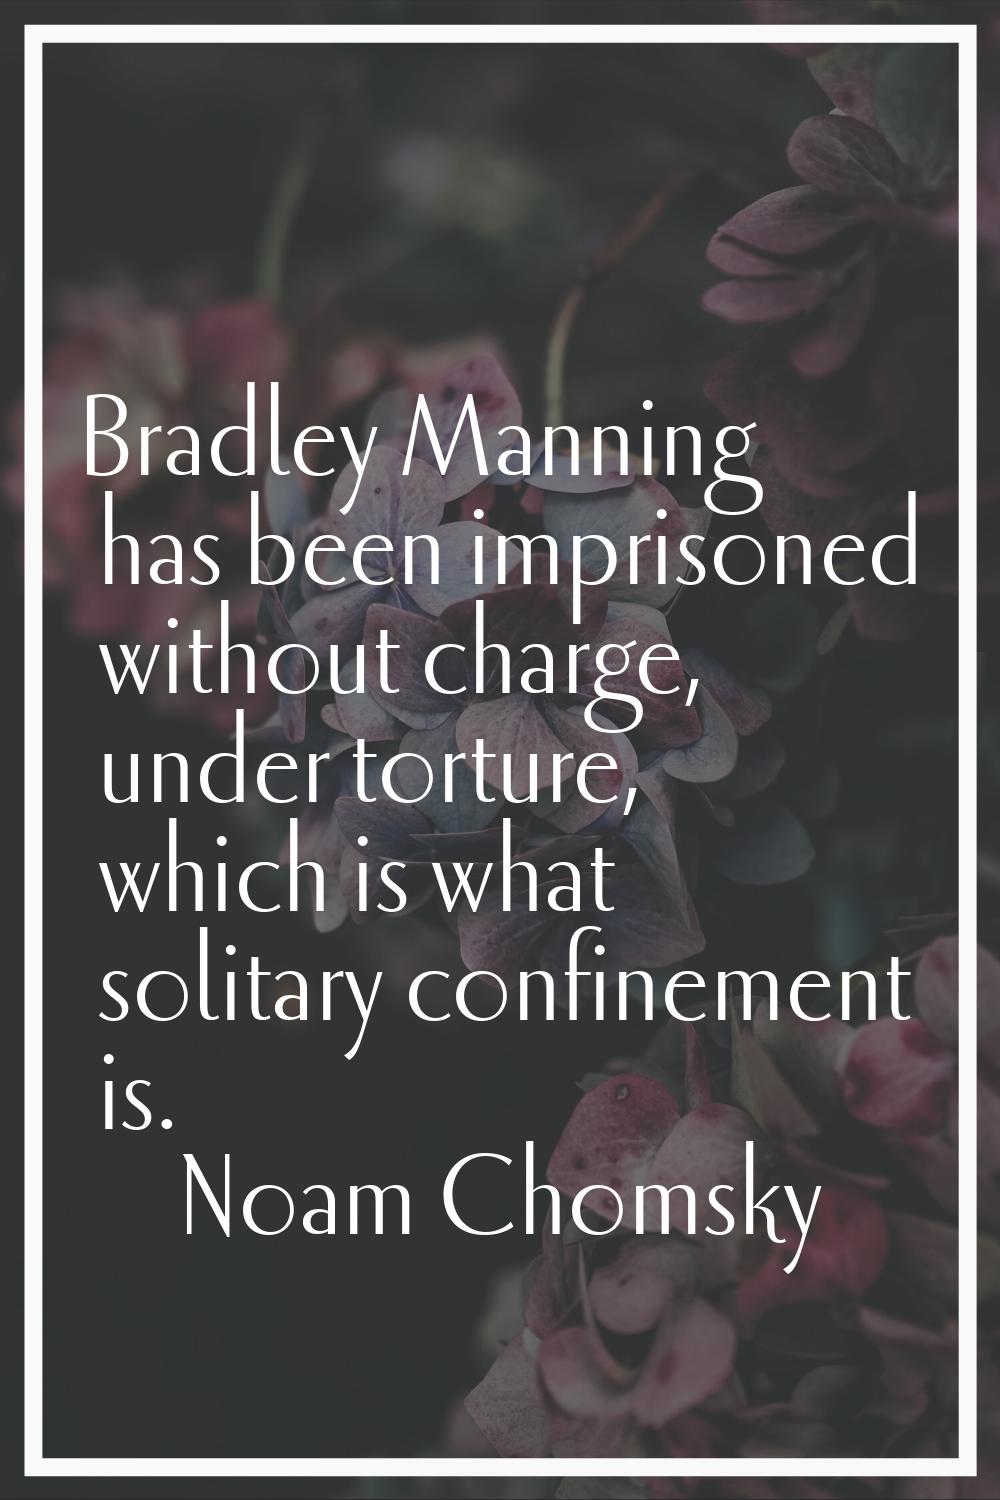 Bradley Manning has been imprisoned without charge, under torture, which is what solitary confineme